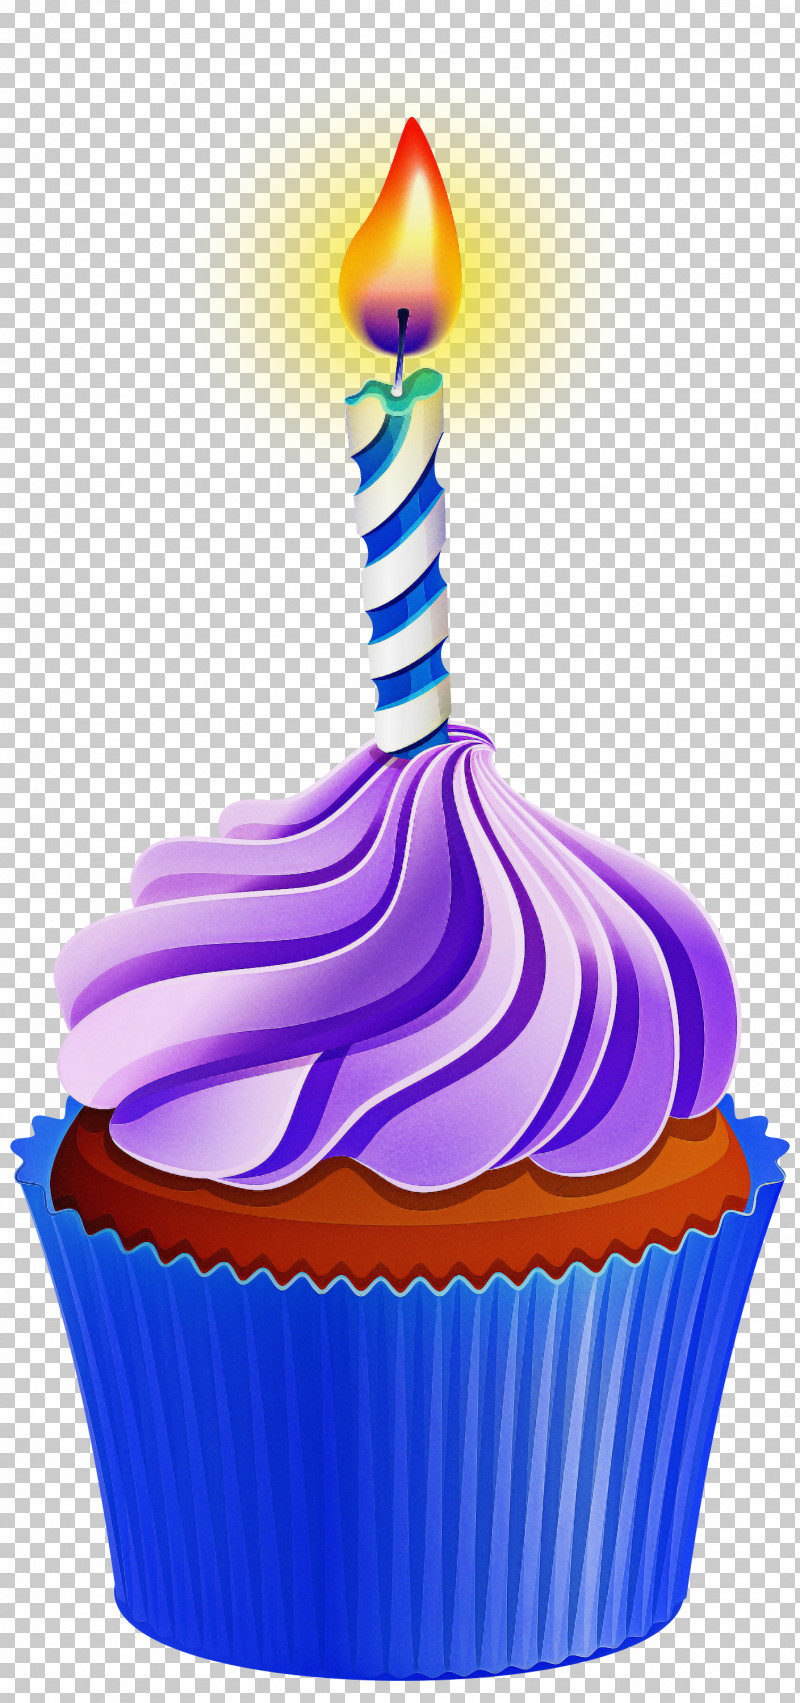 Birthday Candle PNG, Clipart, Baking Cup, Birthday Candle, Buttercream, Cake, Cupcake Free PNG Download